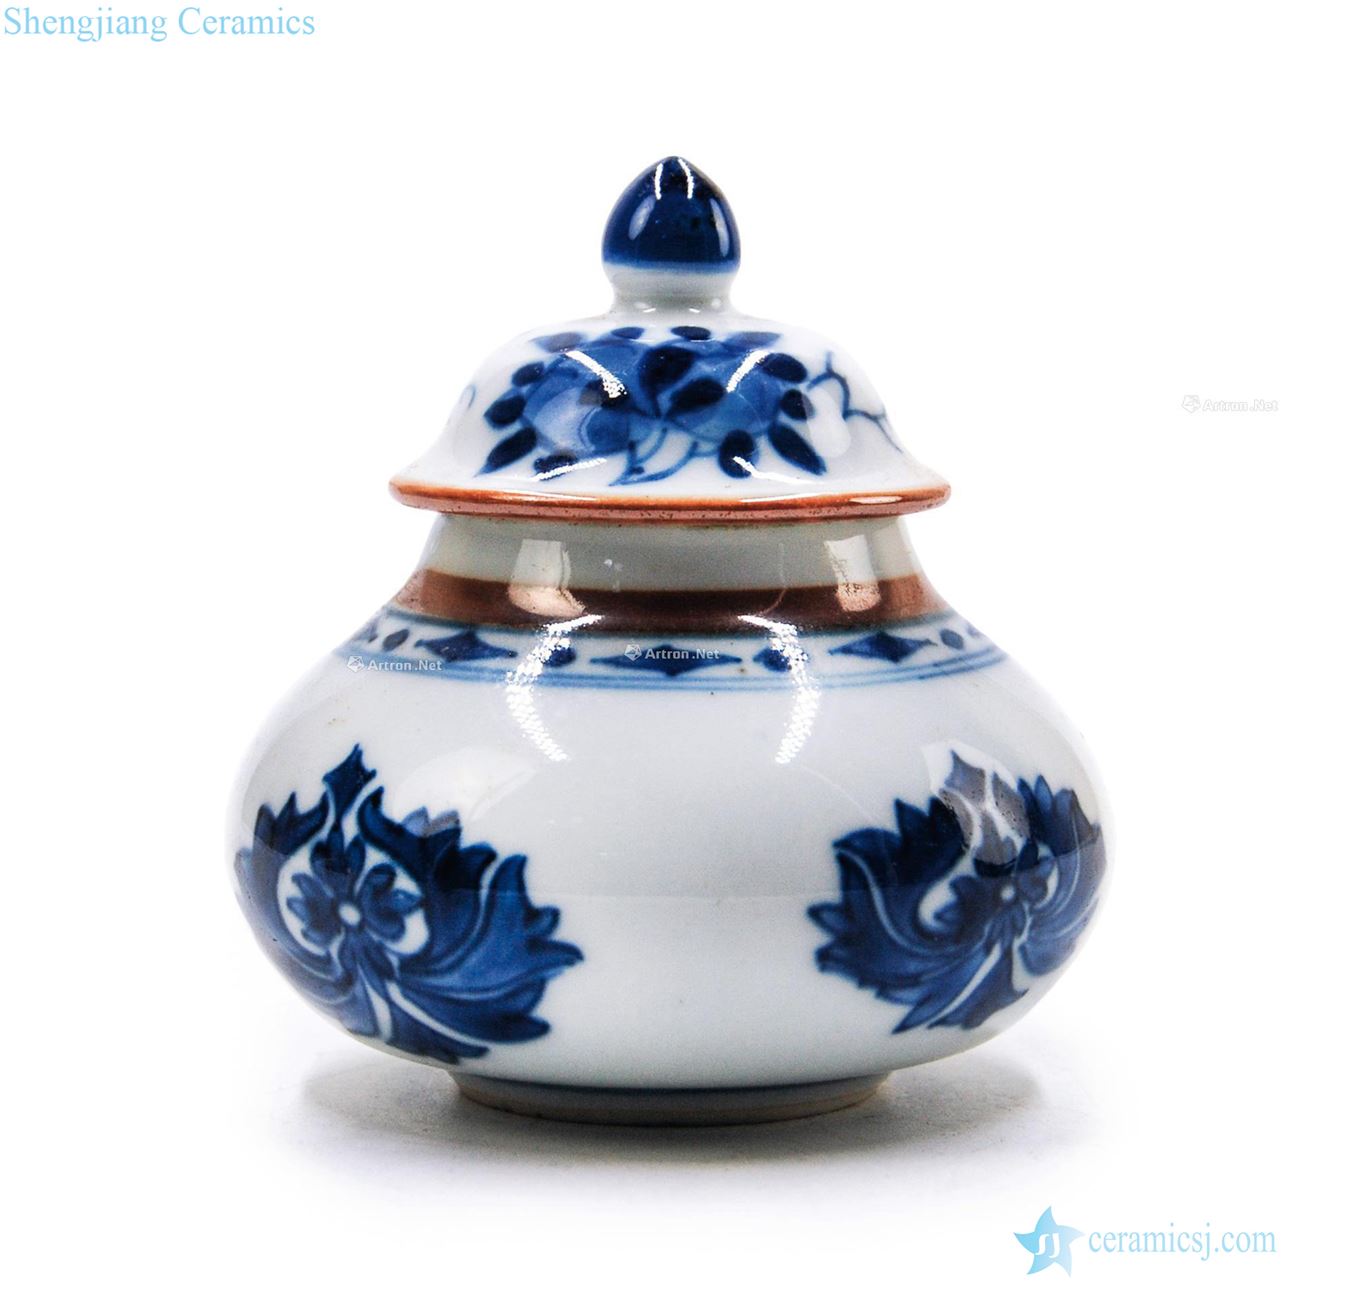 Qing dynasty blue and white POTS